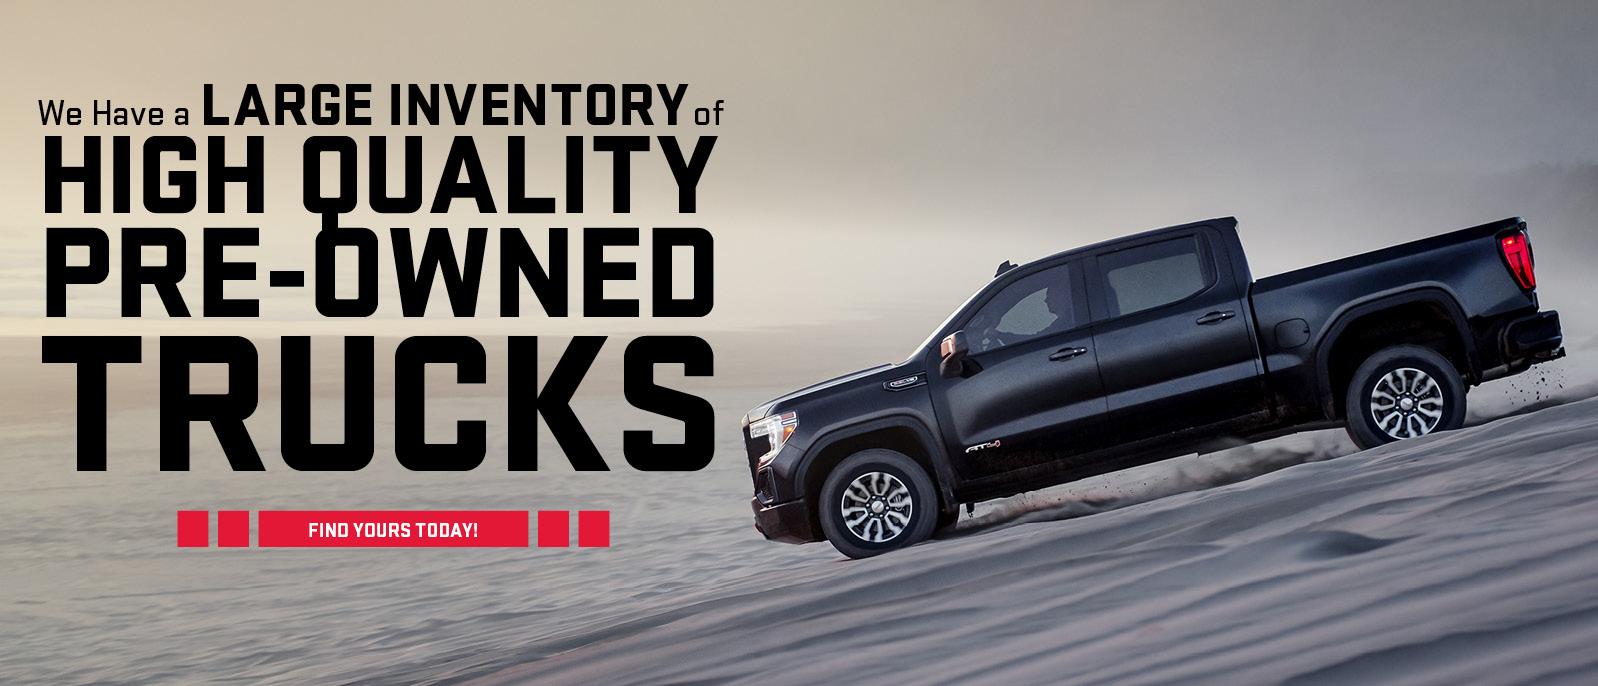 We Have a Large Inventory of High Quality Pre-Owned Trucks